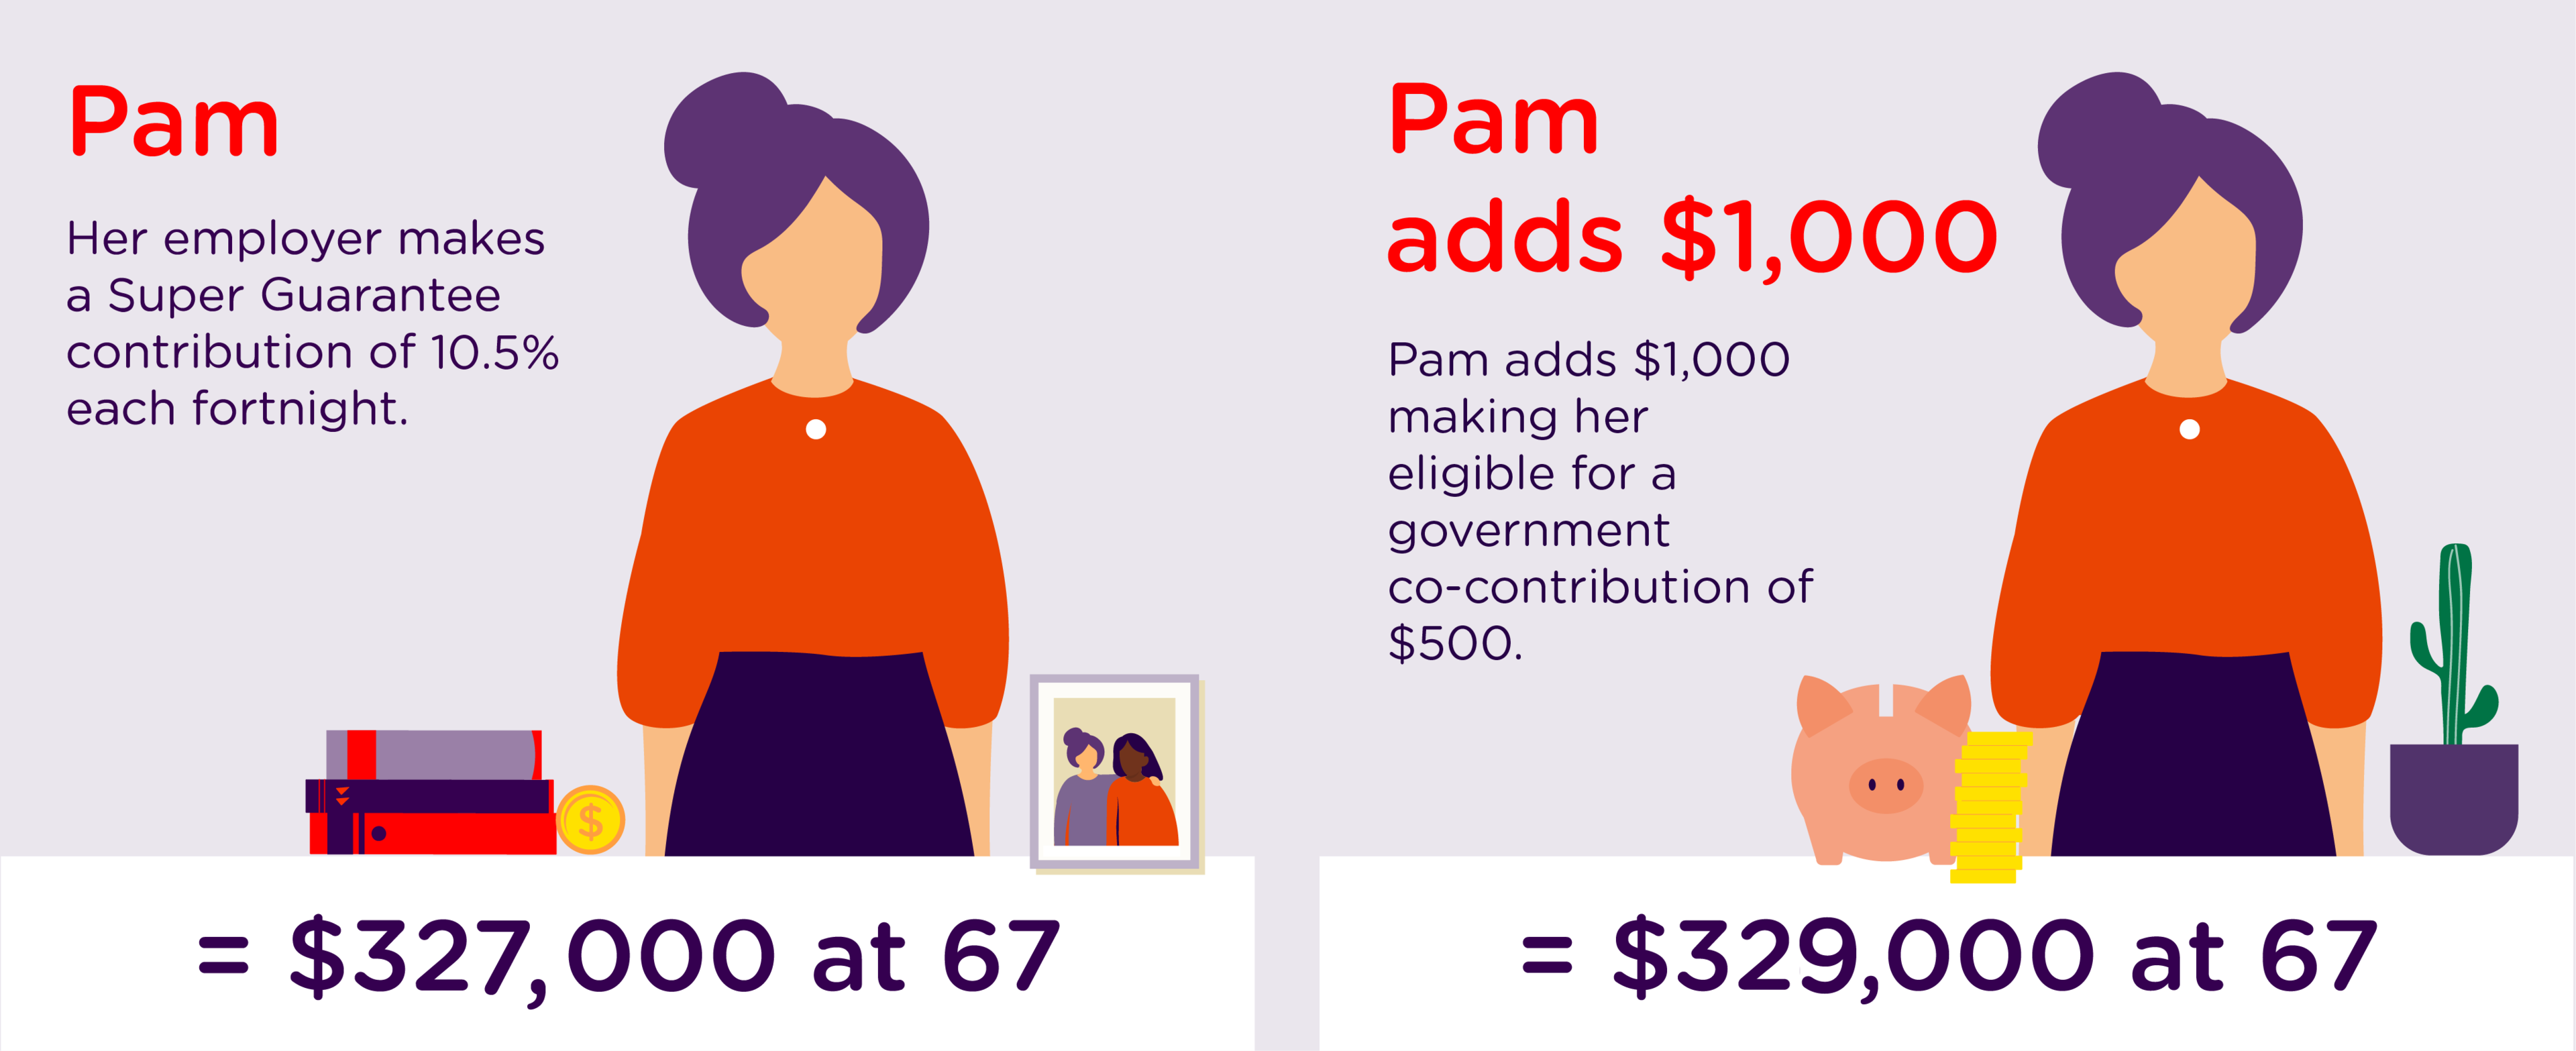 Pam is an event manager aged 55 who earns $39,000 a year, with a current super balance of $200,000. Her employer makes a Super Guarantee contribution of 10.5% each fortnight.Pam decides to make an after-tax contribution of $1,000 in FY23 making her eligible for a government co-contribution of $500.If Pam retires at age 67, this could mean a difference in her super balance of $2,000 compared to if she didn't make any after-tax contribution and receive a government co-contribution.